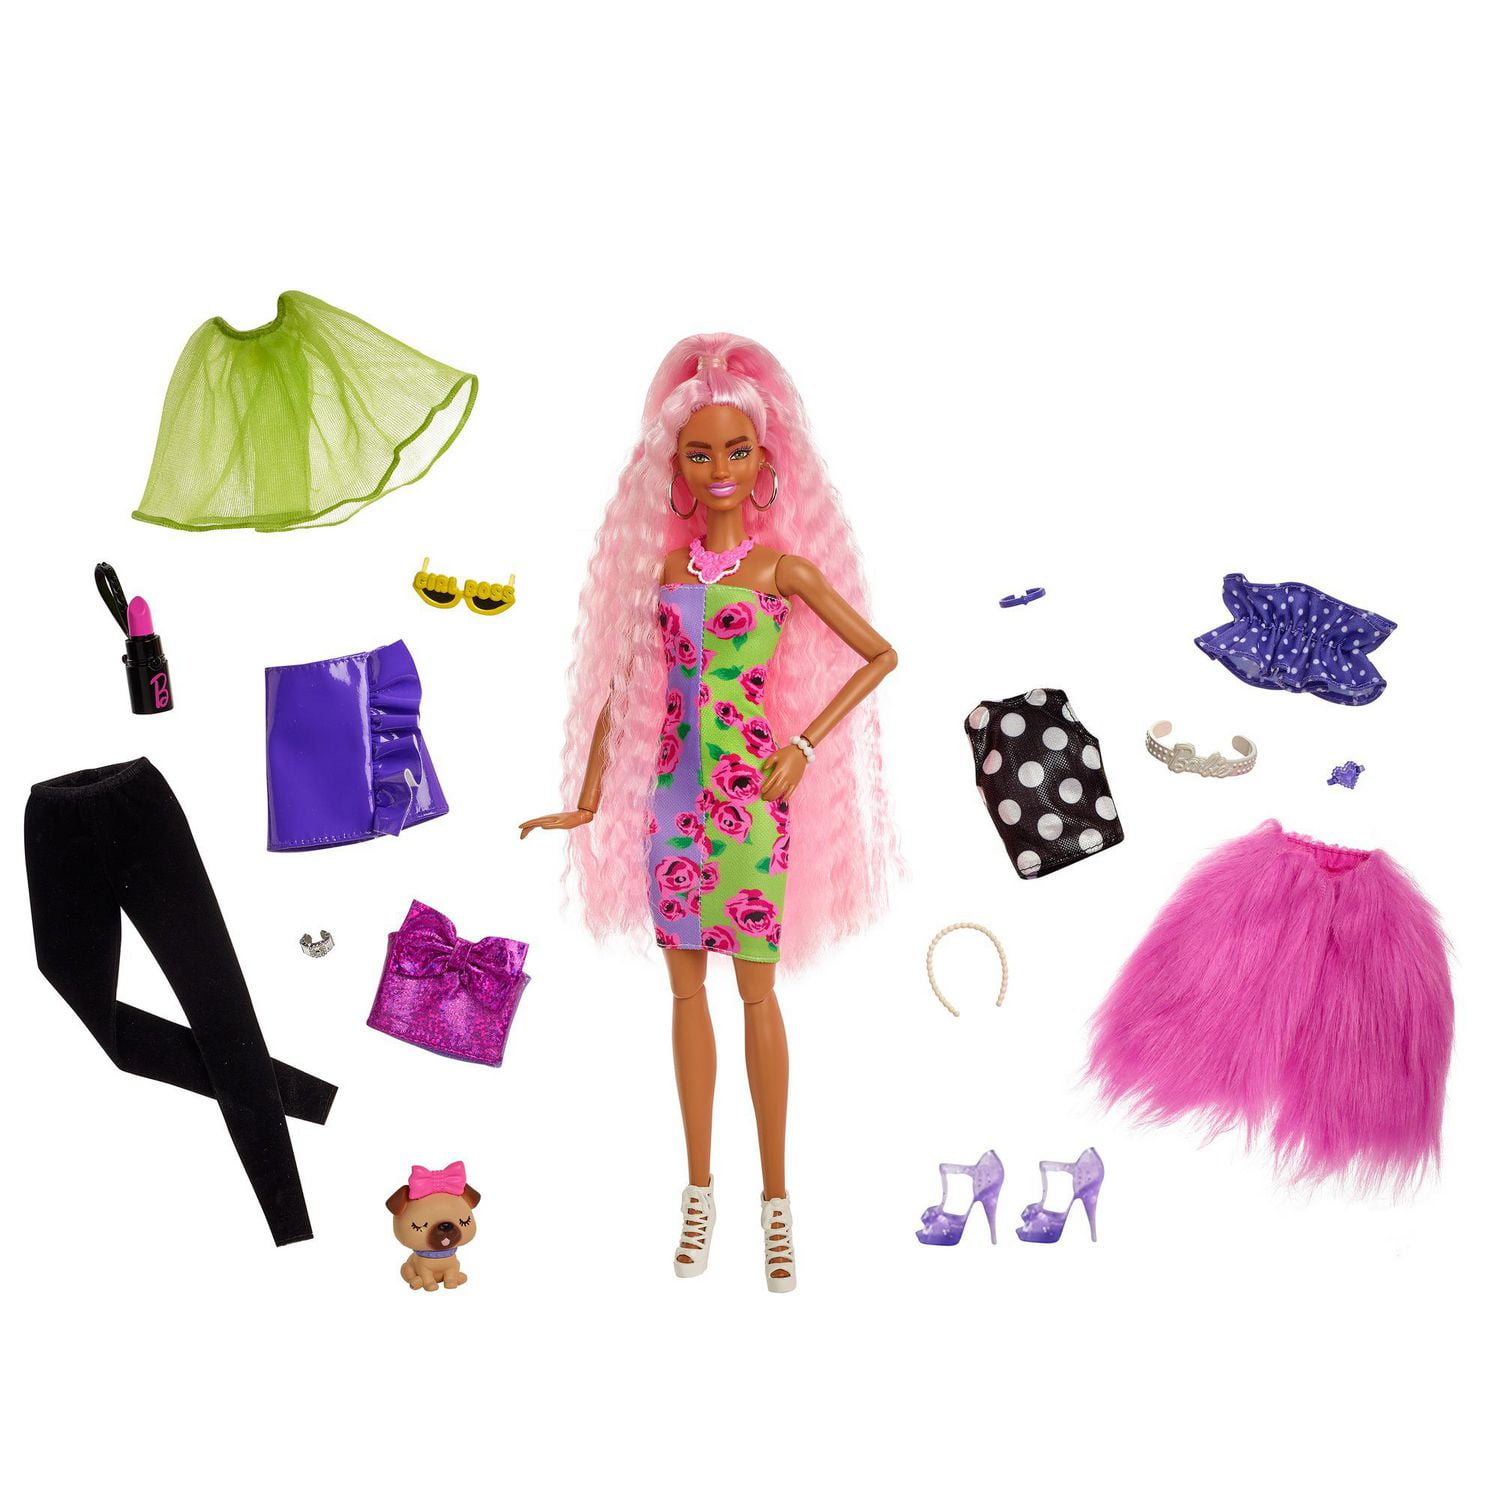 Barbie Extra Deluxe Doll & Accessories Set with Pet, Mix & Match